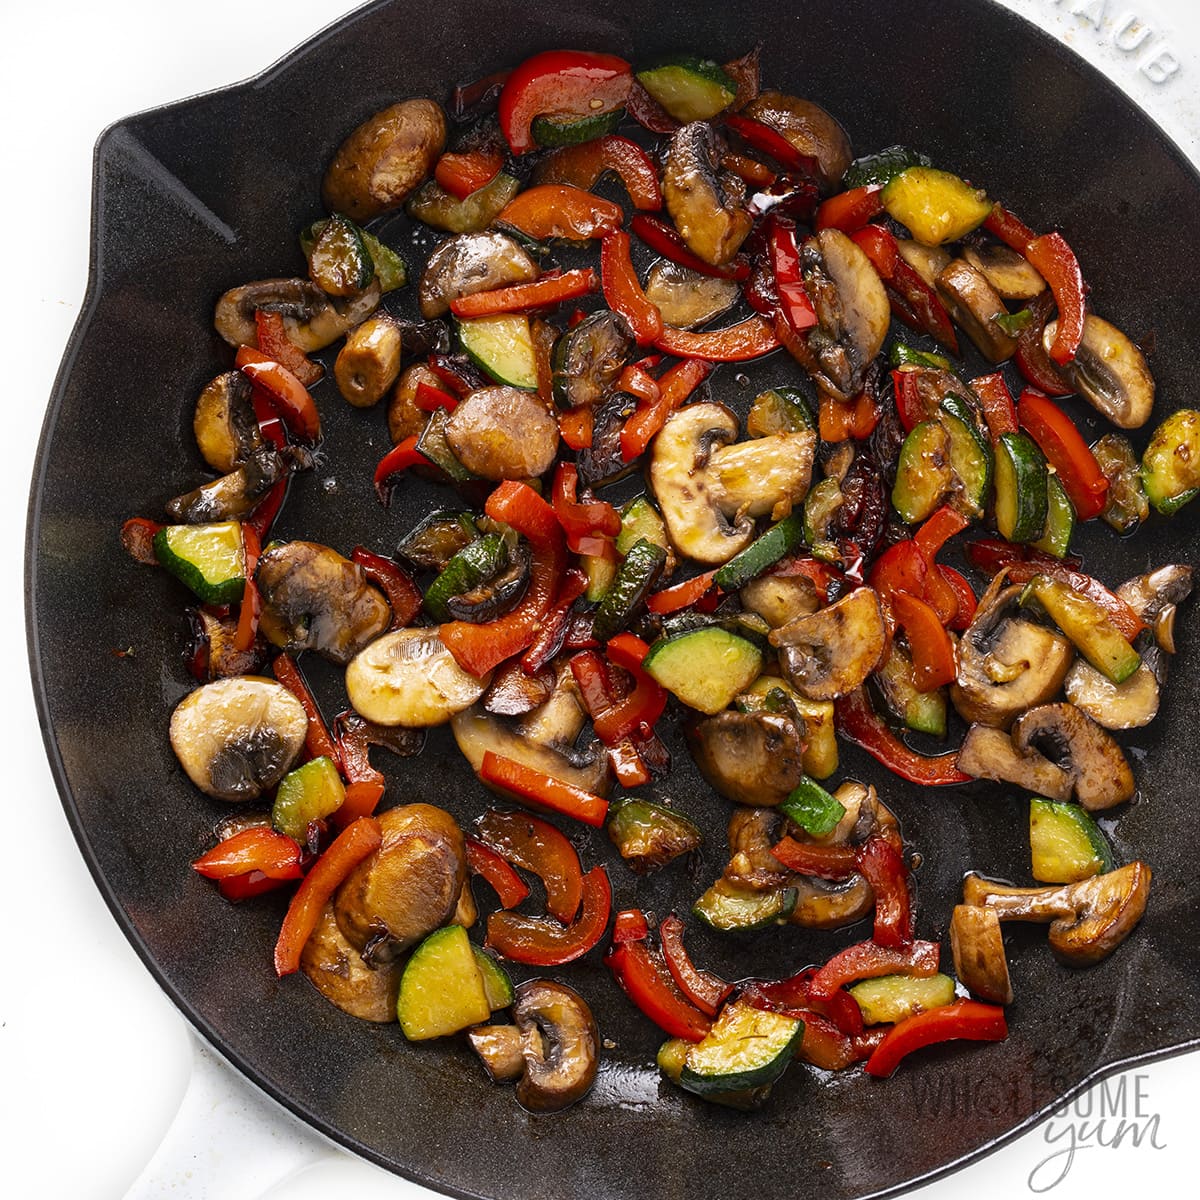 Add the vegetables to the pan and stir-fry until cooked.